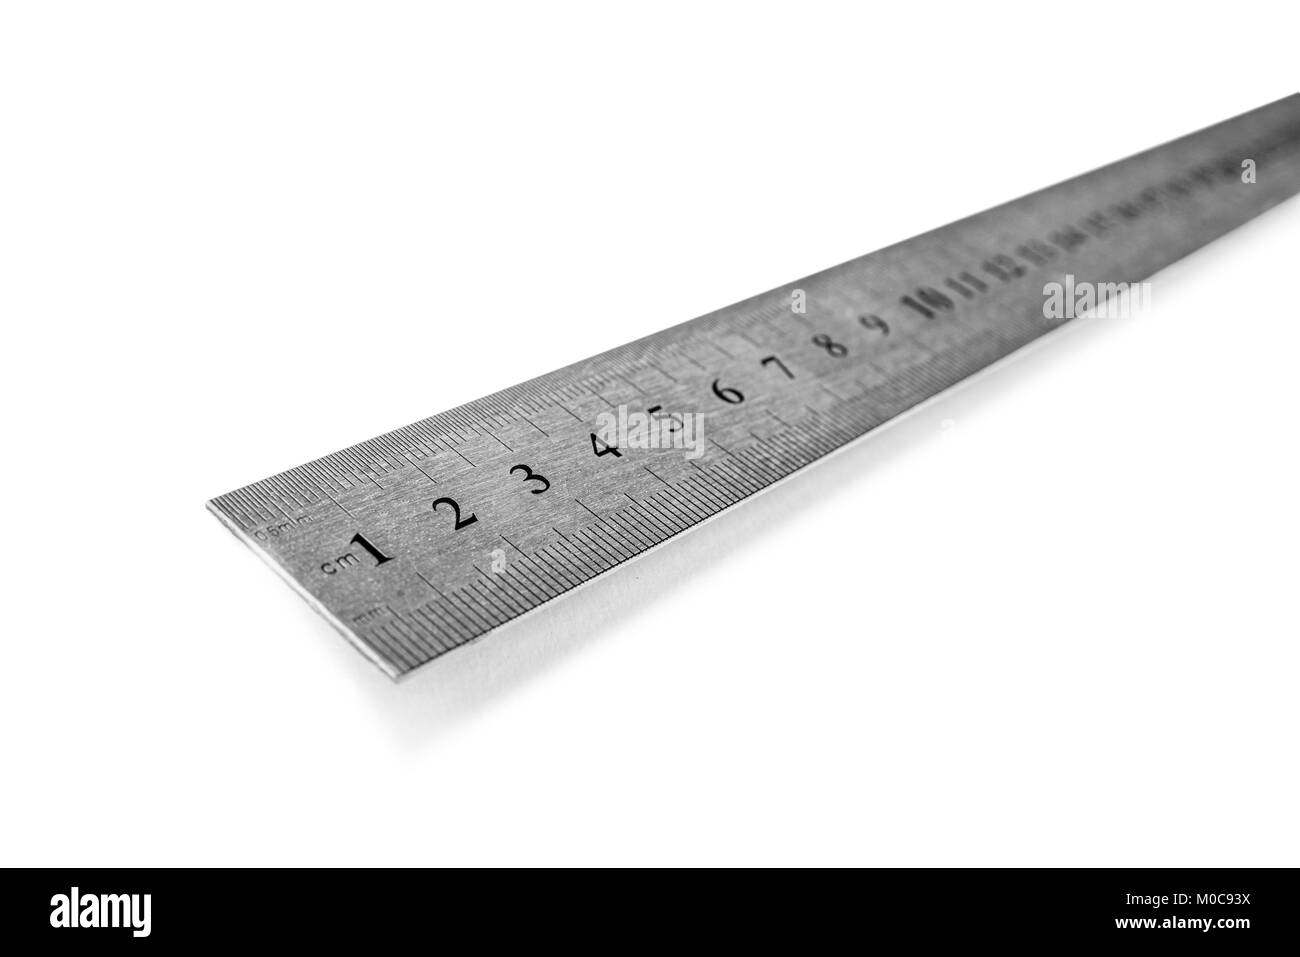 Metal ruler in centimeters or inches. Measuring tool on the white background Stock Photo